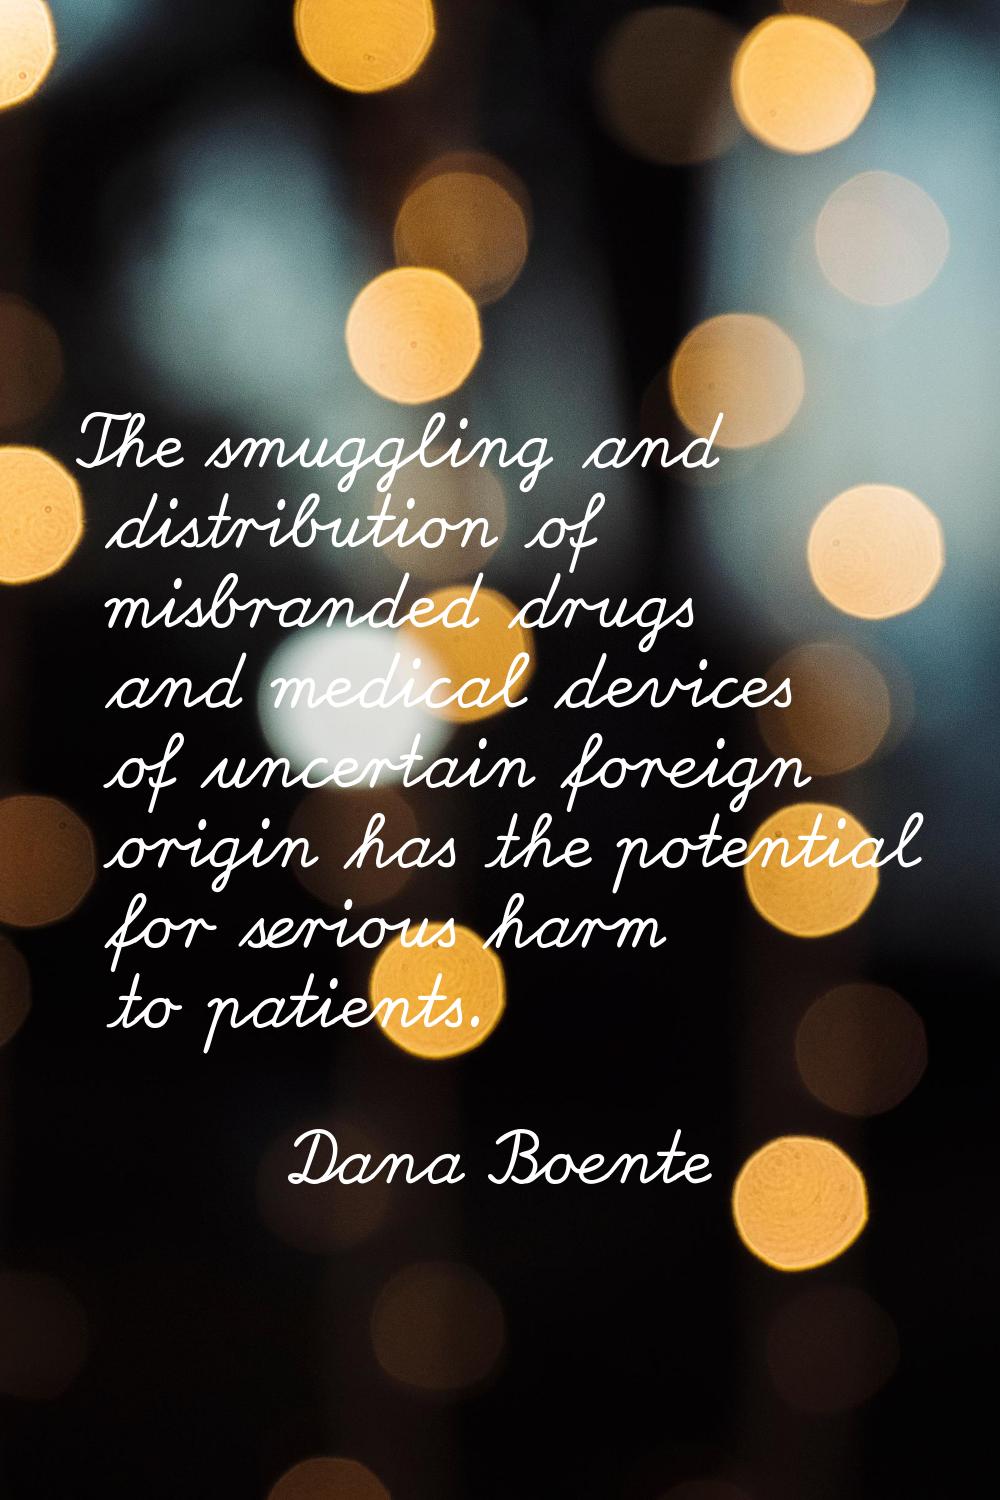 The smuggling and distribution of misbranded drugs and medical devices of uncertain foreign origin 